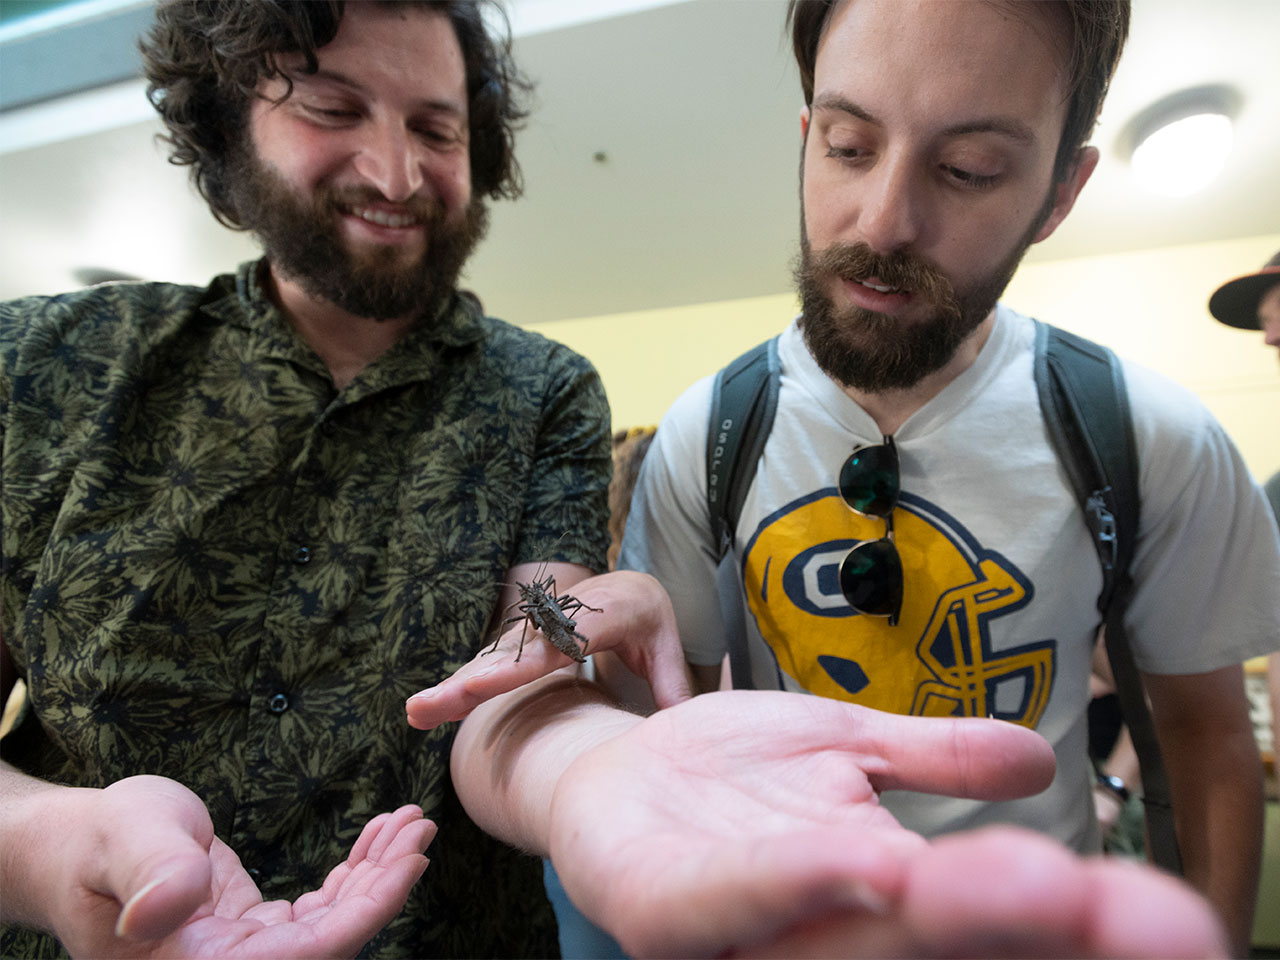 Two individuals at the UC Davis' Bohart Museum on Picnic Day, closely observing a walking stick bug perched on one of their hands, with expressions of focused curiosity on their faces.